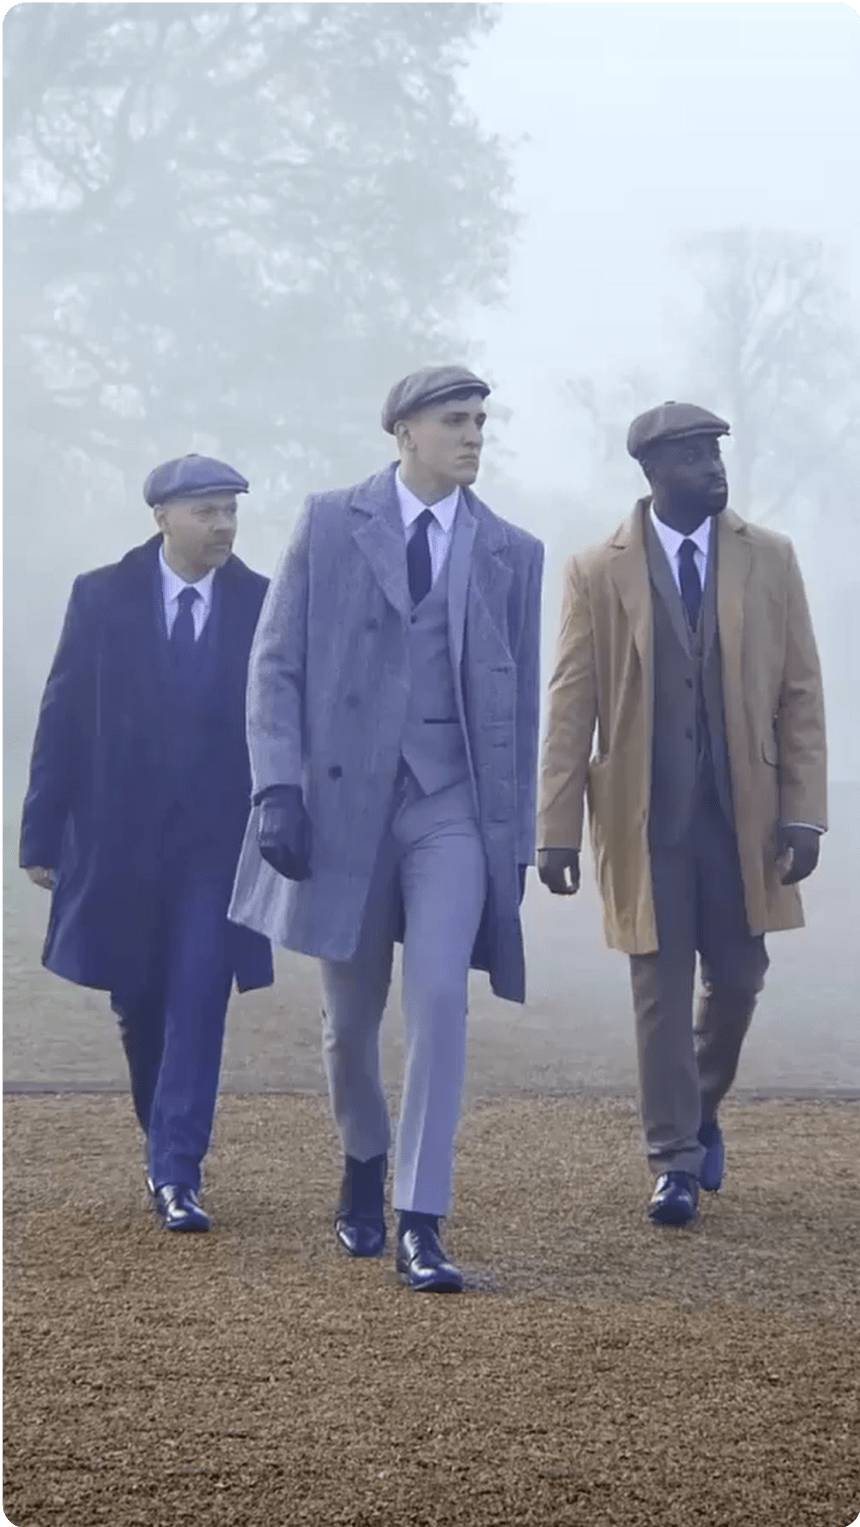 A group of men walking on a foggy day